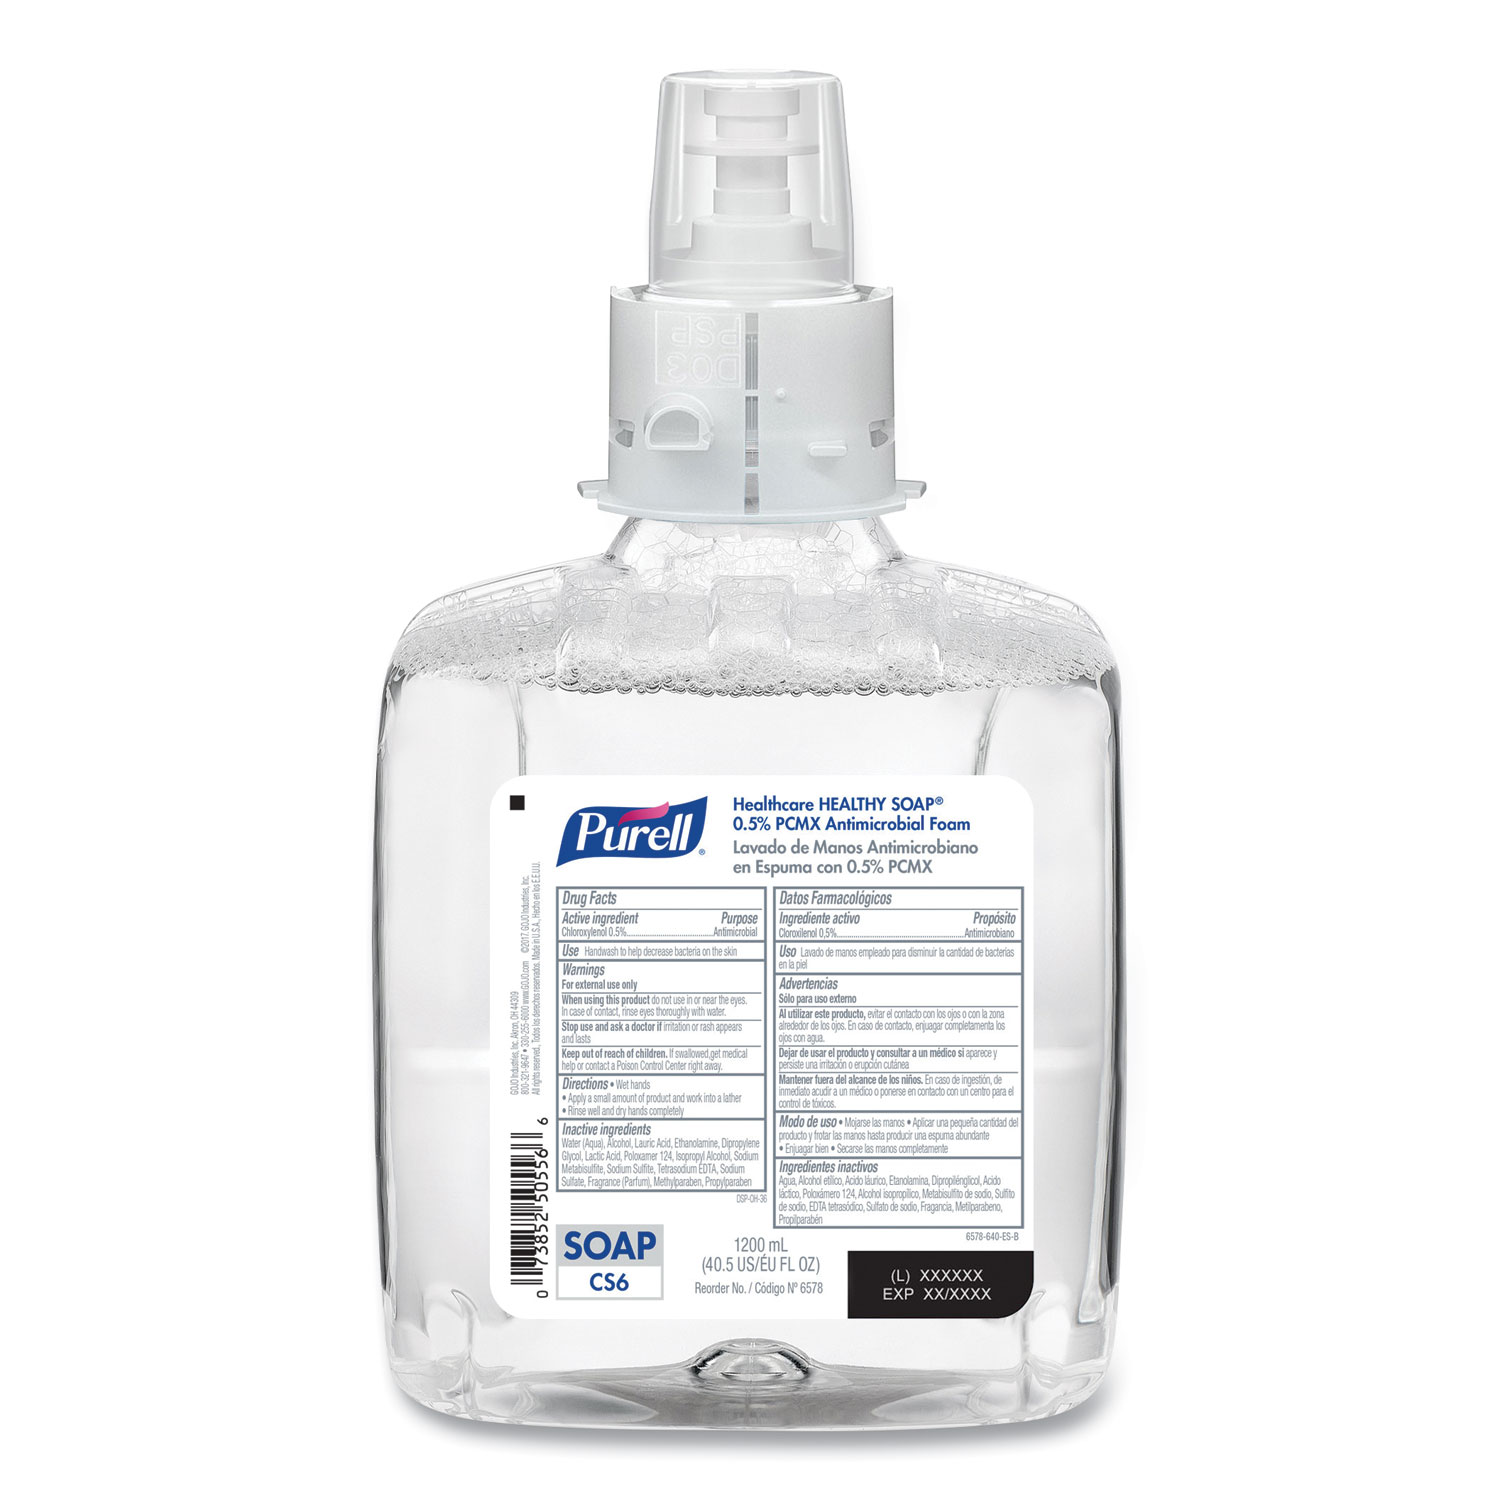  PURELL 6578-02 Healthcare HEALTHY SOAP 0.5% PCMX Antimicrobial Foam, For CS6 Dispensers, 1,200 mL, 2/CT (GOJ657802) 